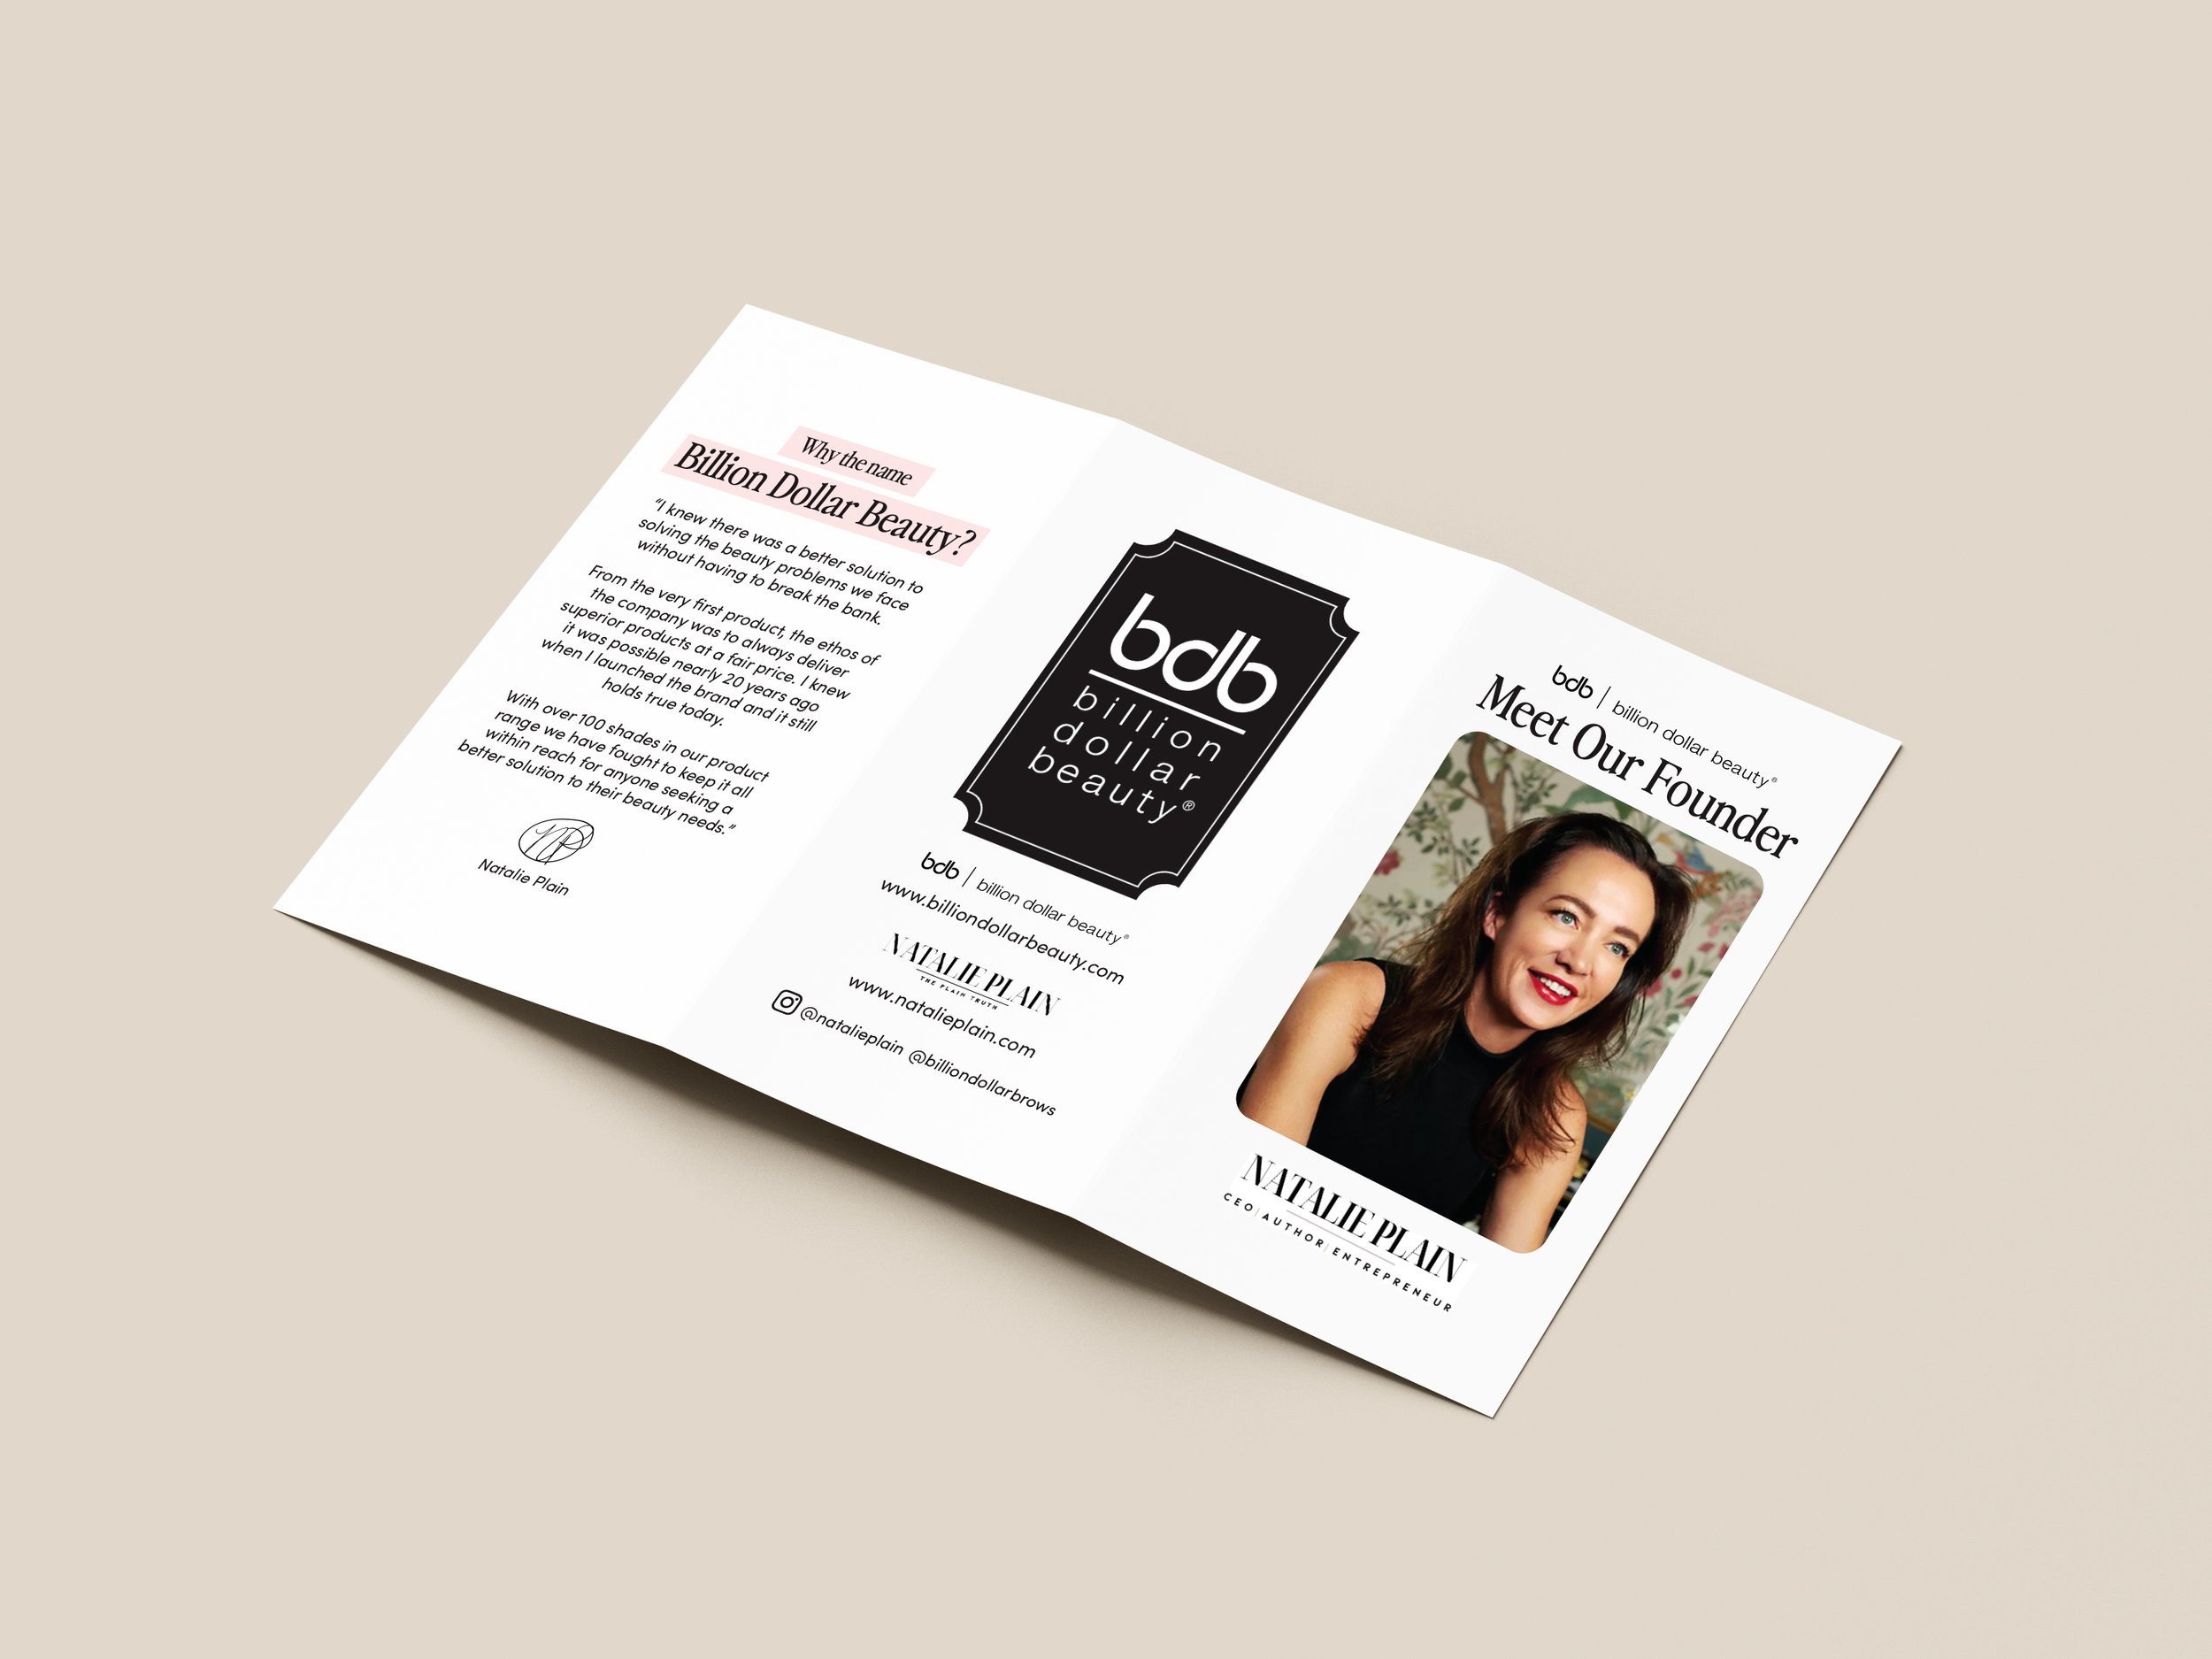 Meet Our Founder Brochure for CosmoProf Convention